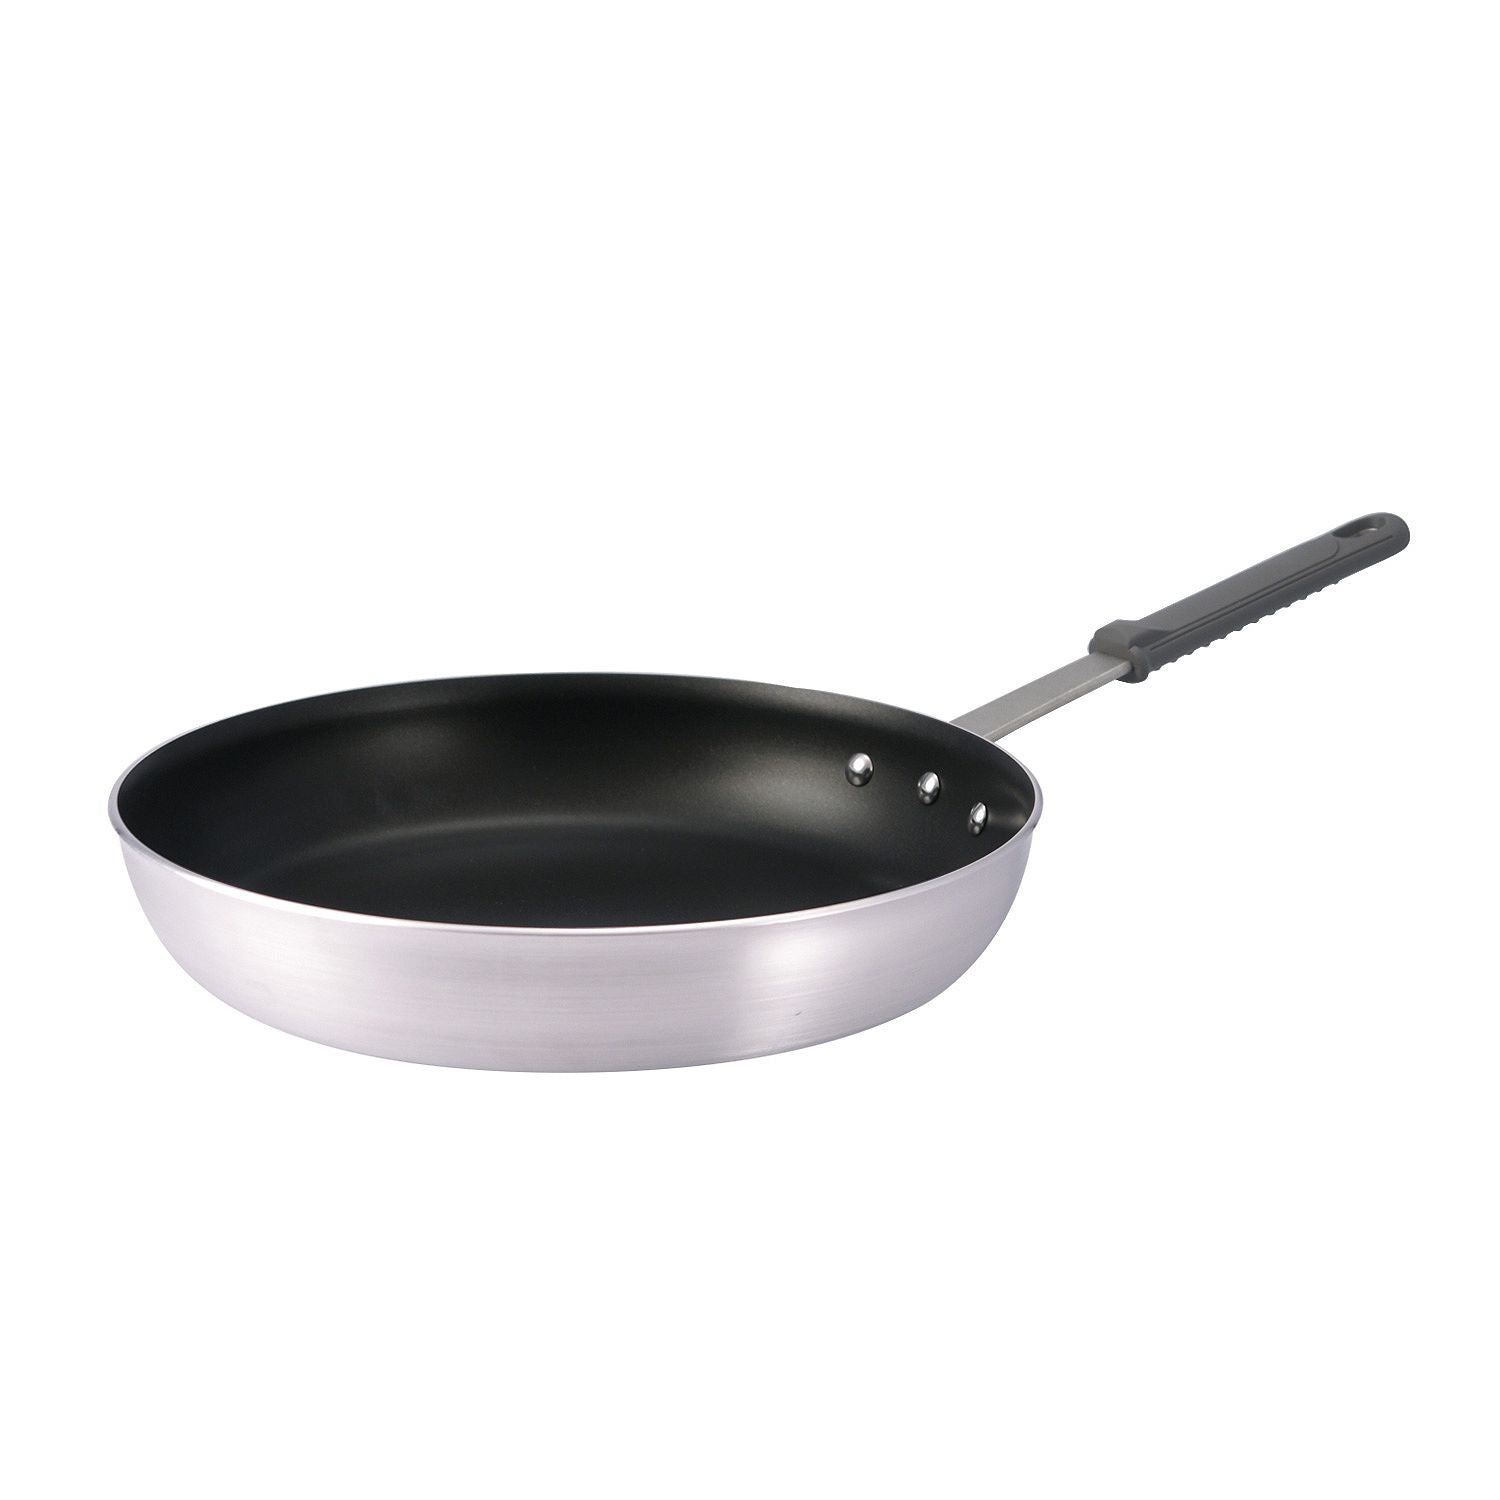 Mommy Review Monday: Member's Mark 14 Inch Non-Stick Fry Pan